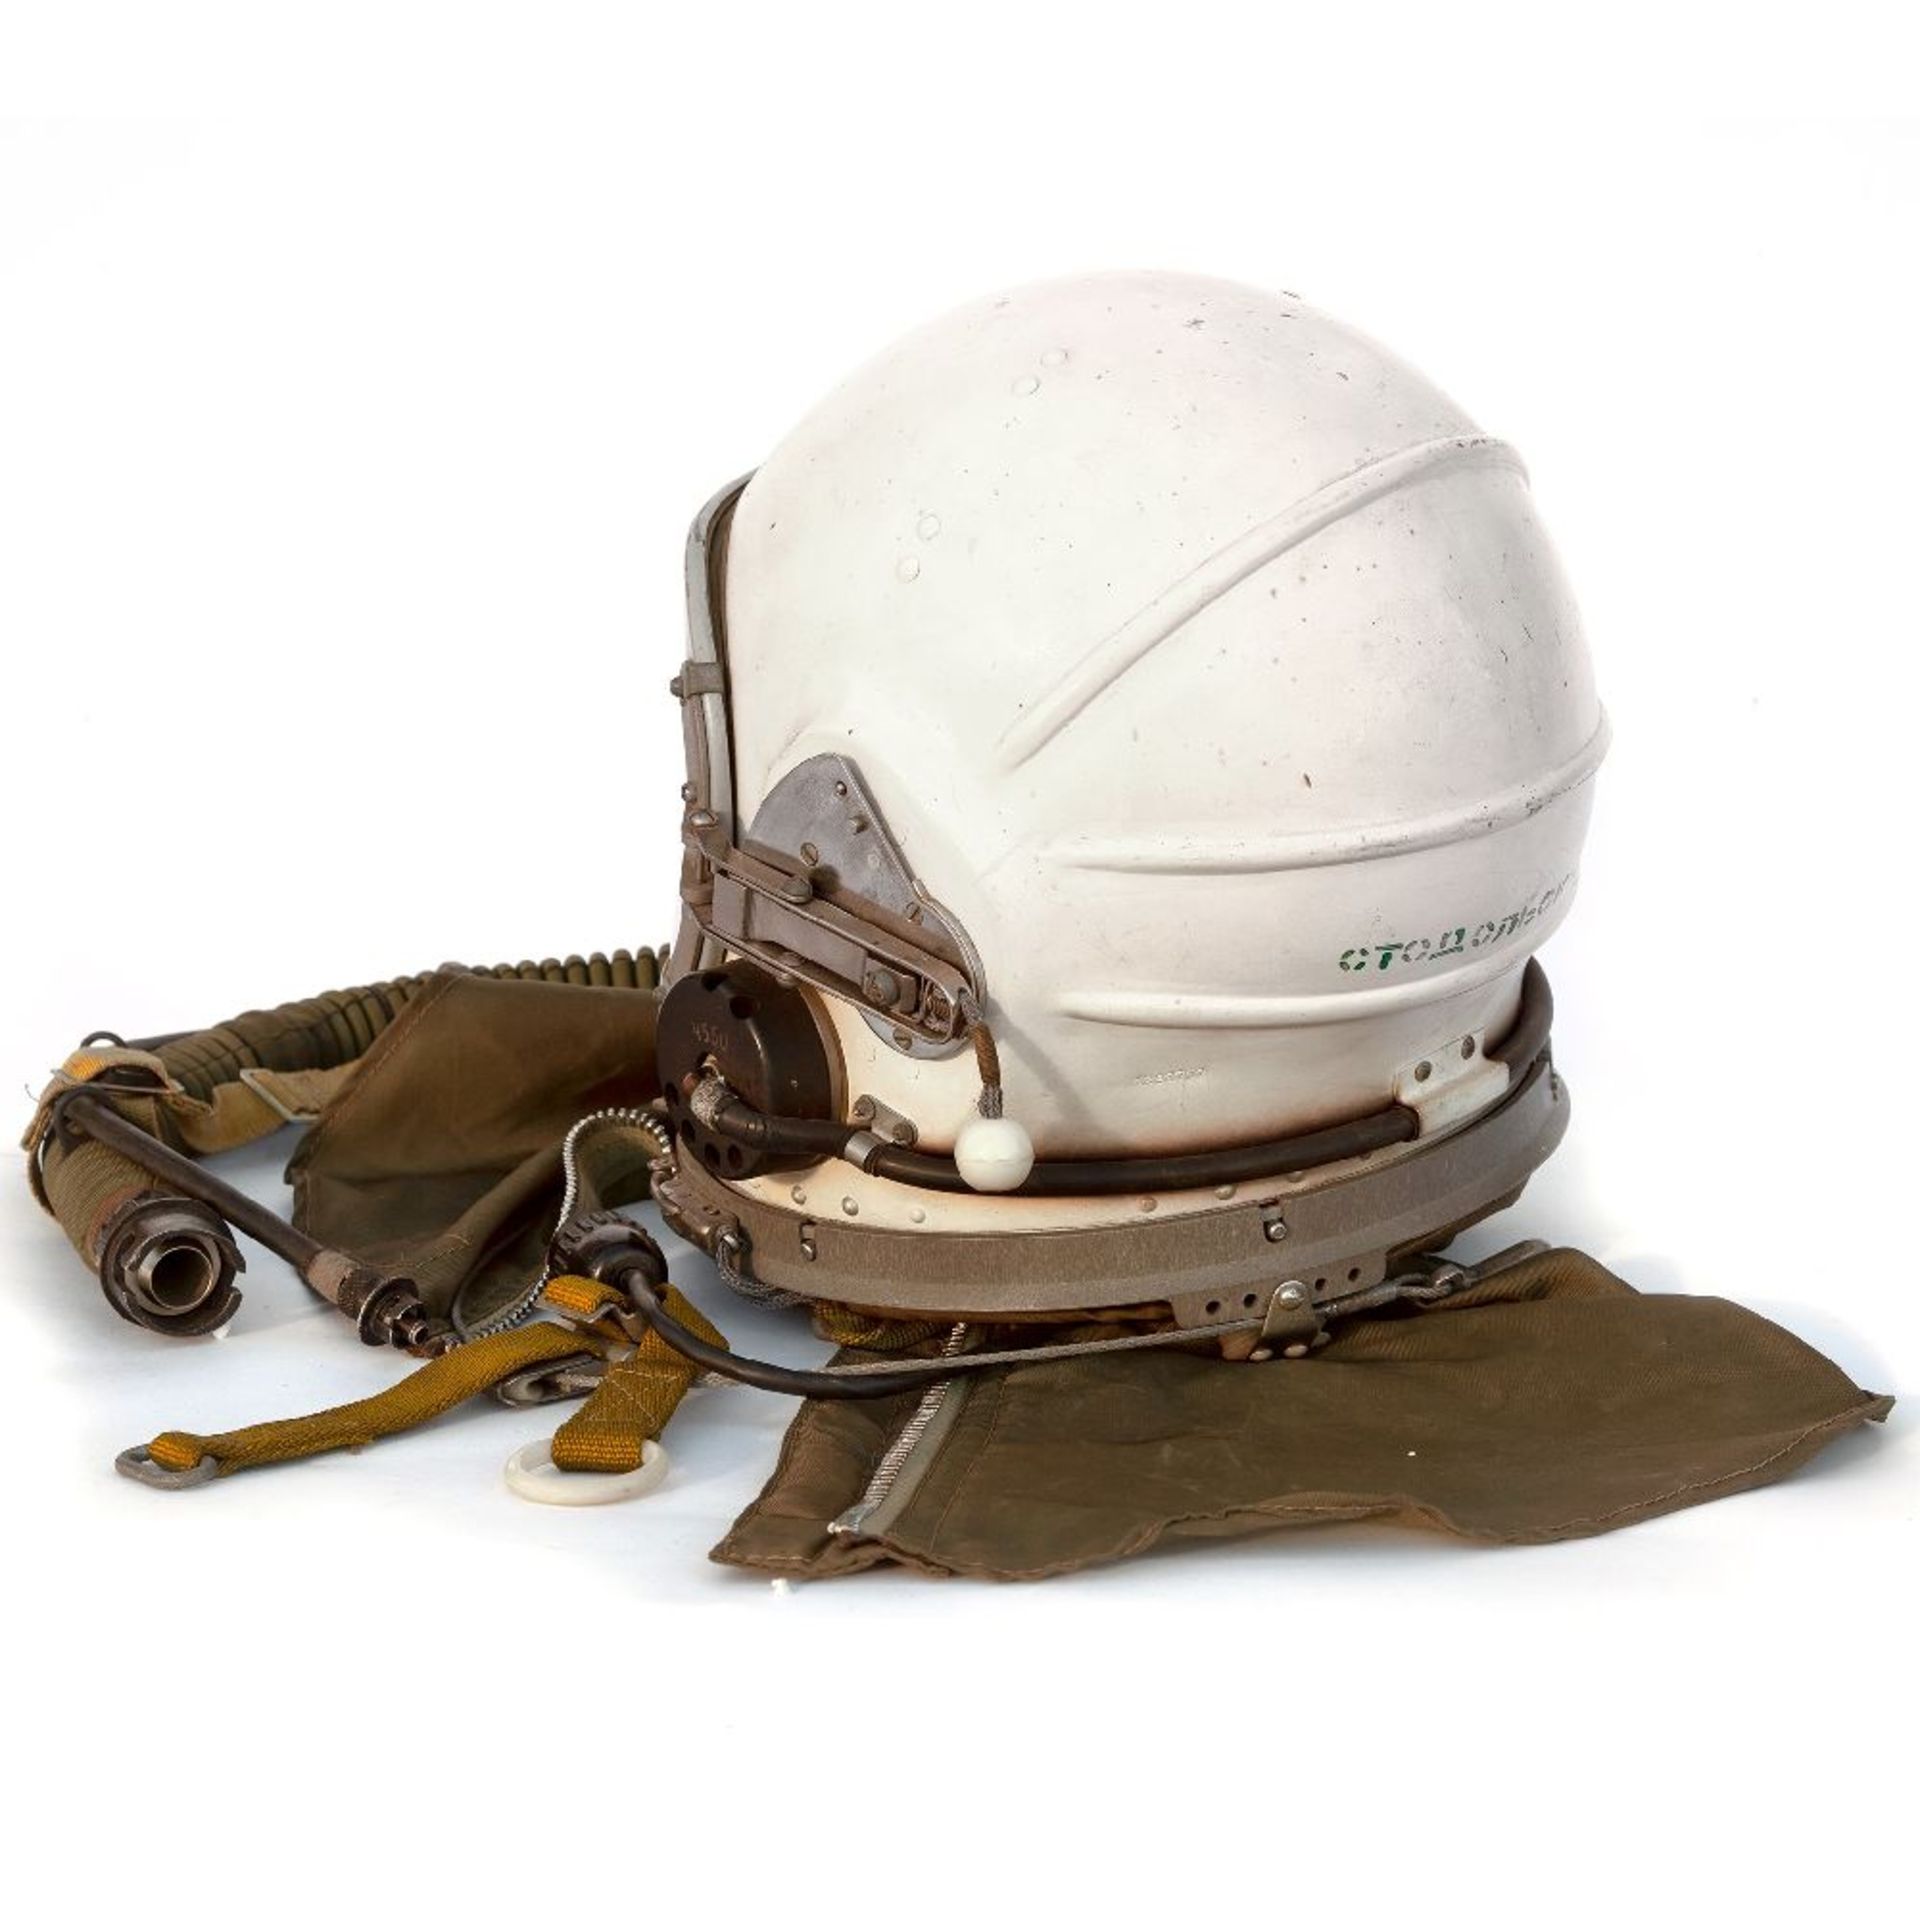 A COLD WAR SOVIET MIG 25 PILOT'S HELMET,c.1960-65, constructed for high altitude flight, also used - Image 5 of 5